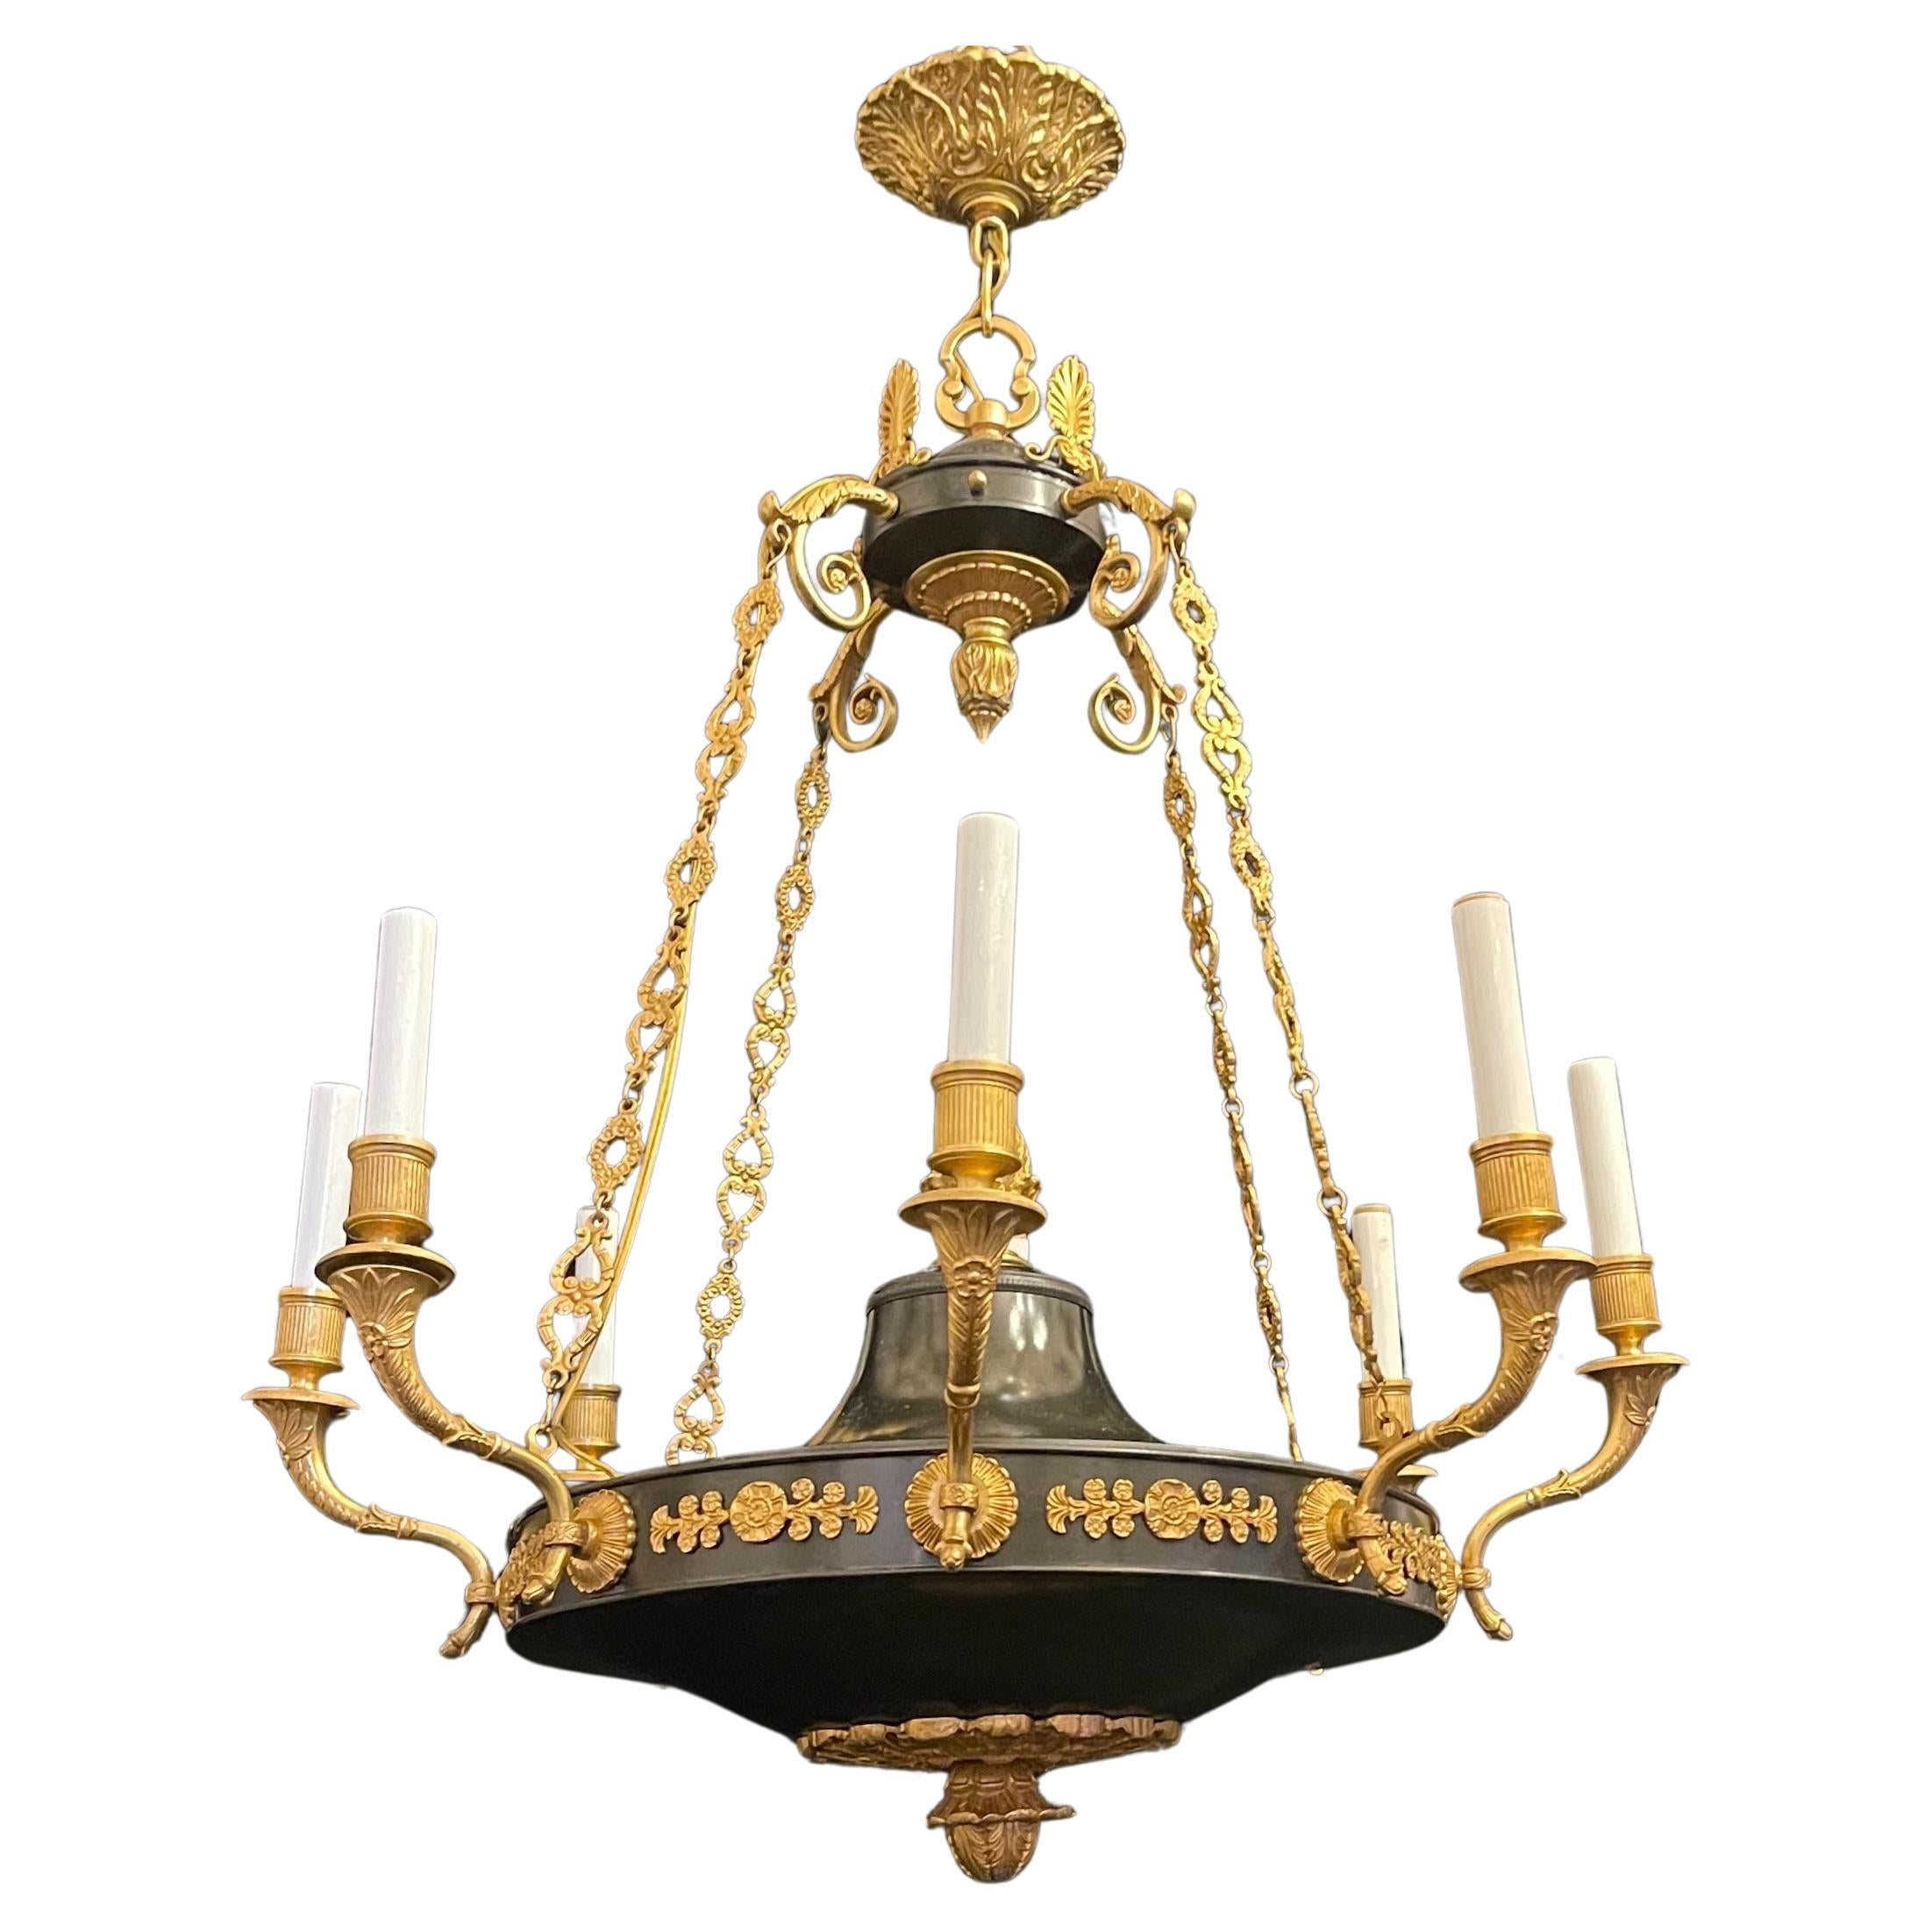 Wonderful French Empire Neoclassical Patinated Ormolu Bronze Chandelier Fixture For Sale